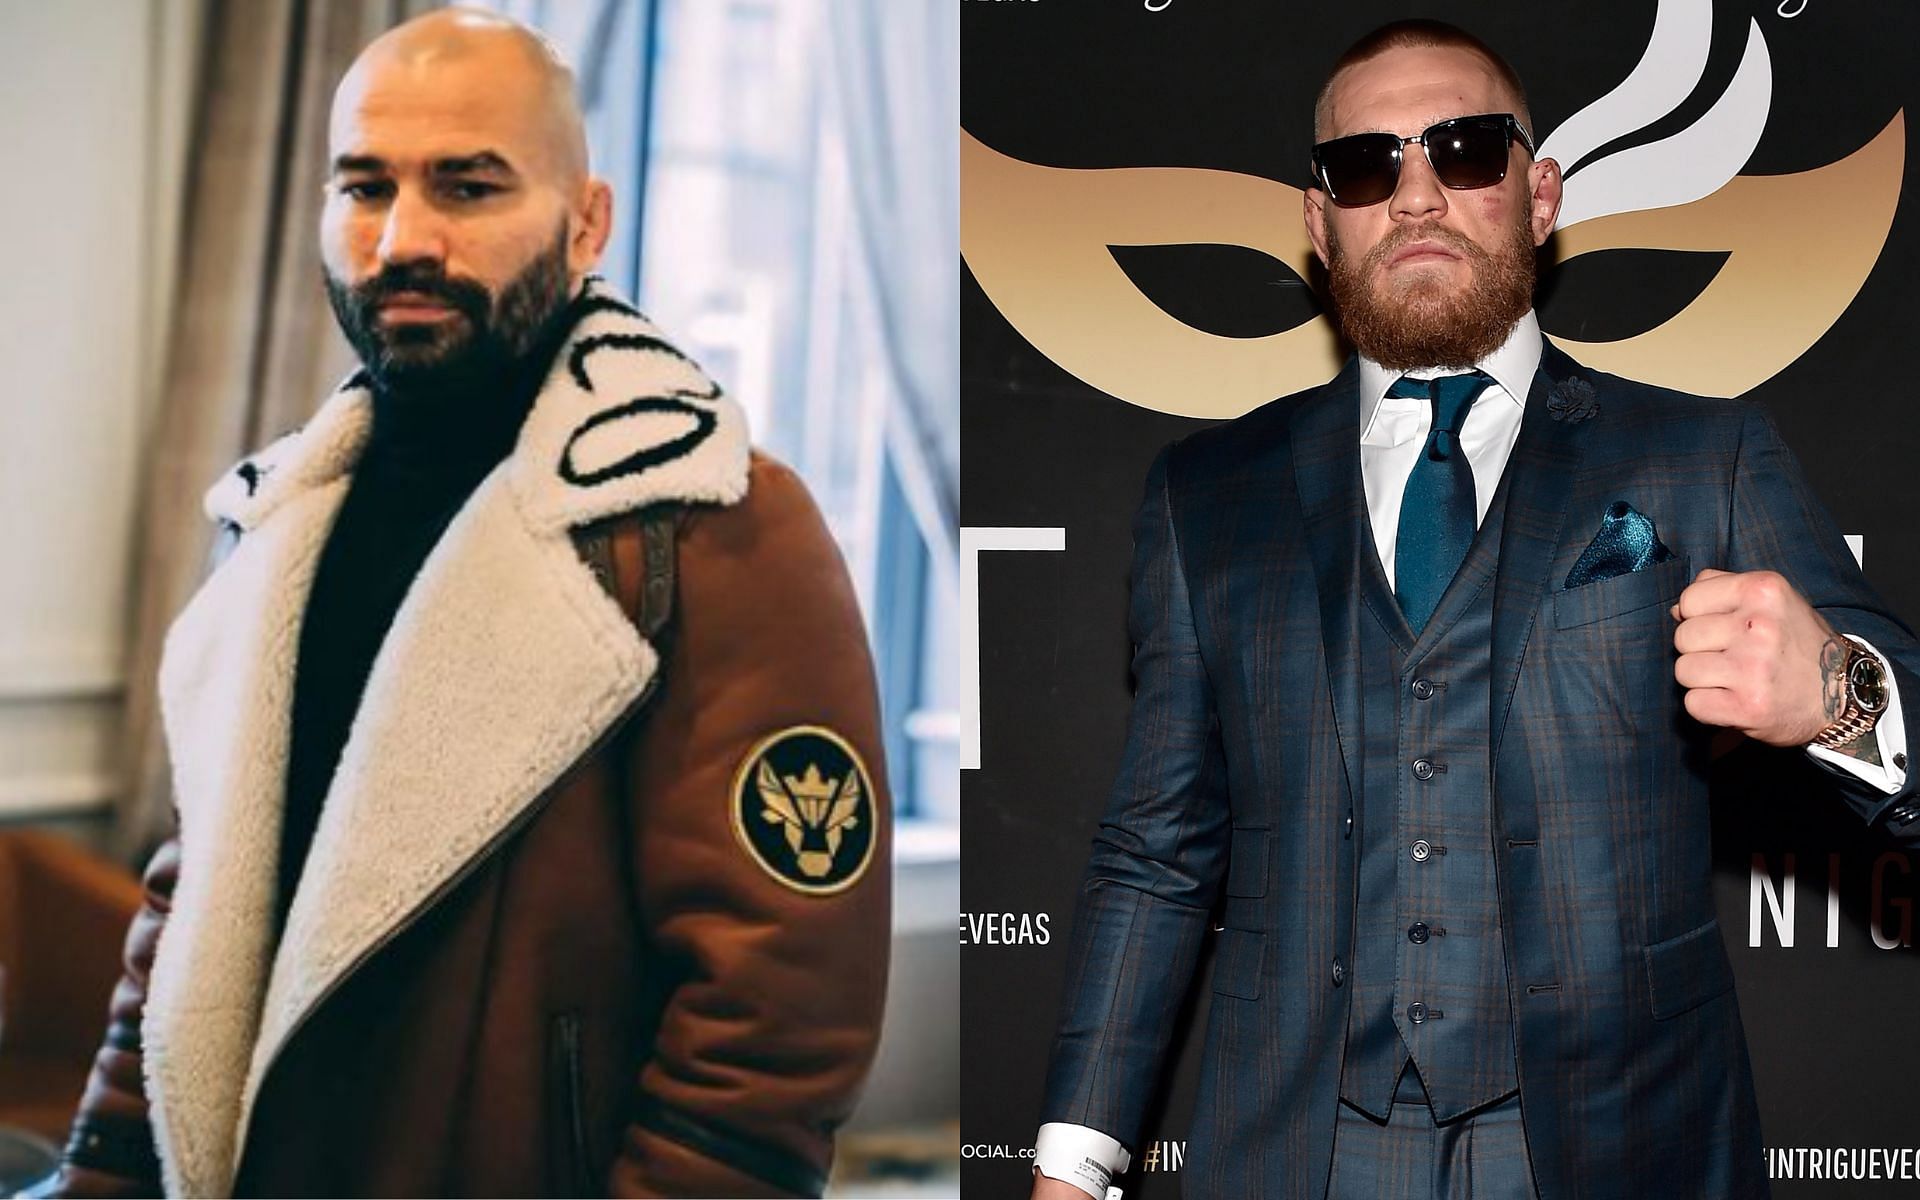 Artem Lobov (left) and Conor McGregor (right) (Image credits Getty Images and @rushammer on Instagram)